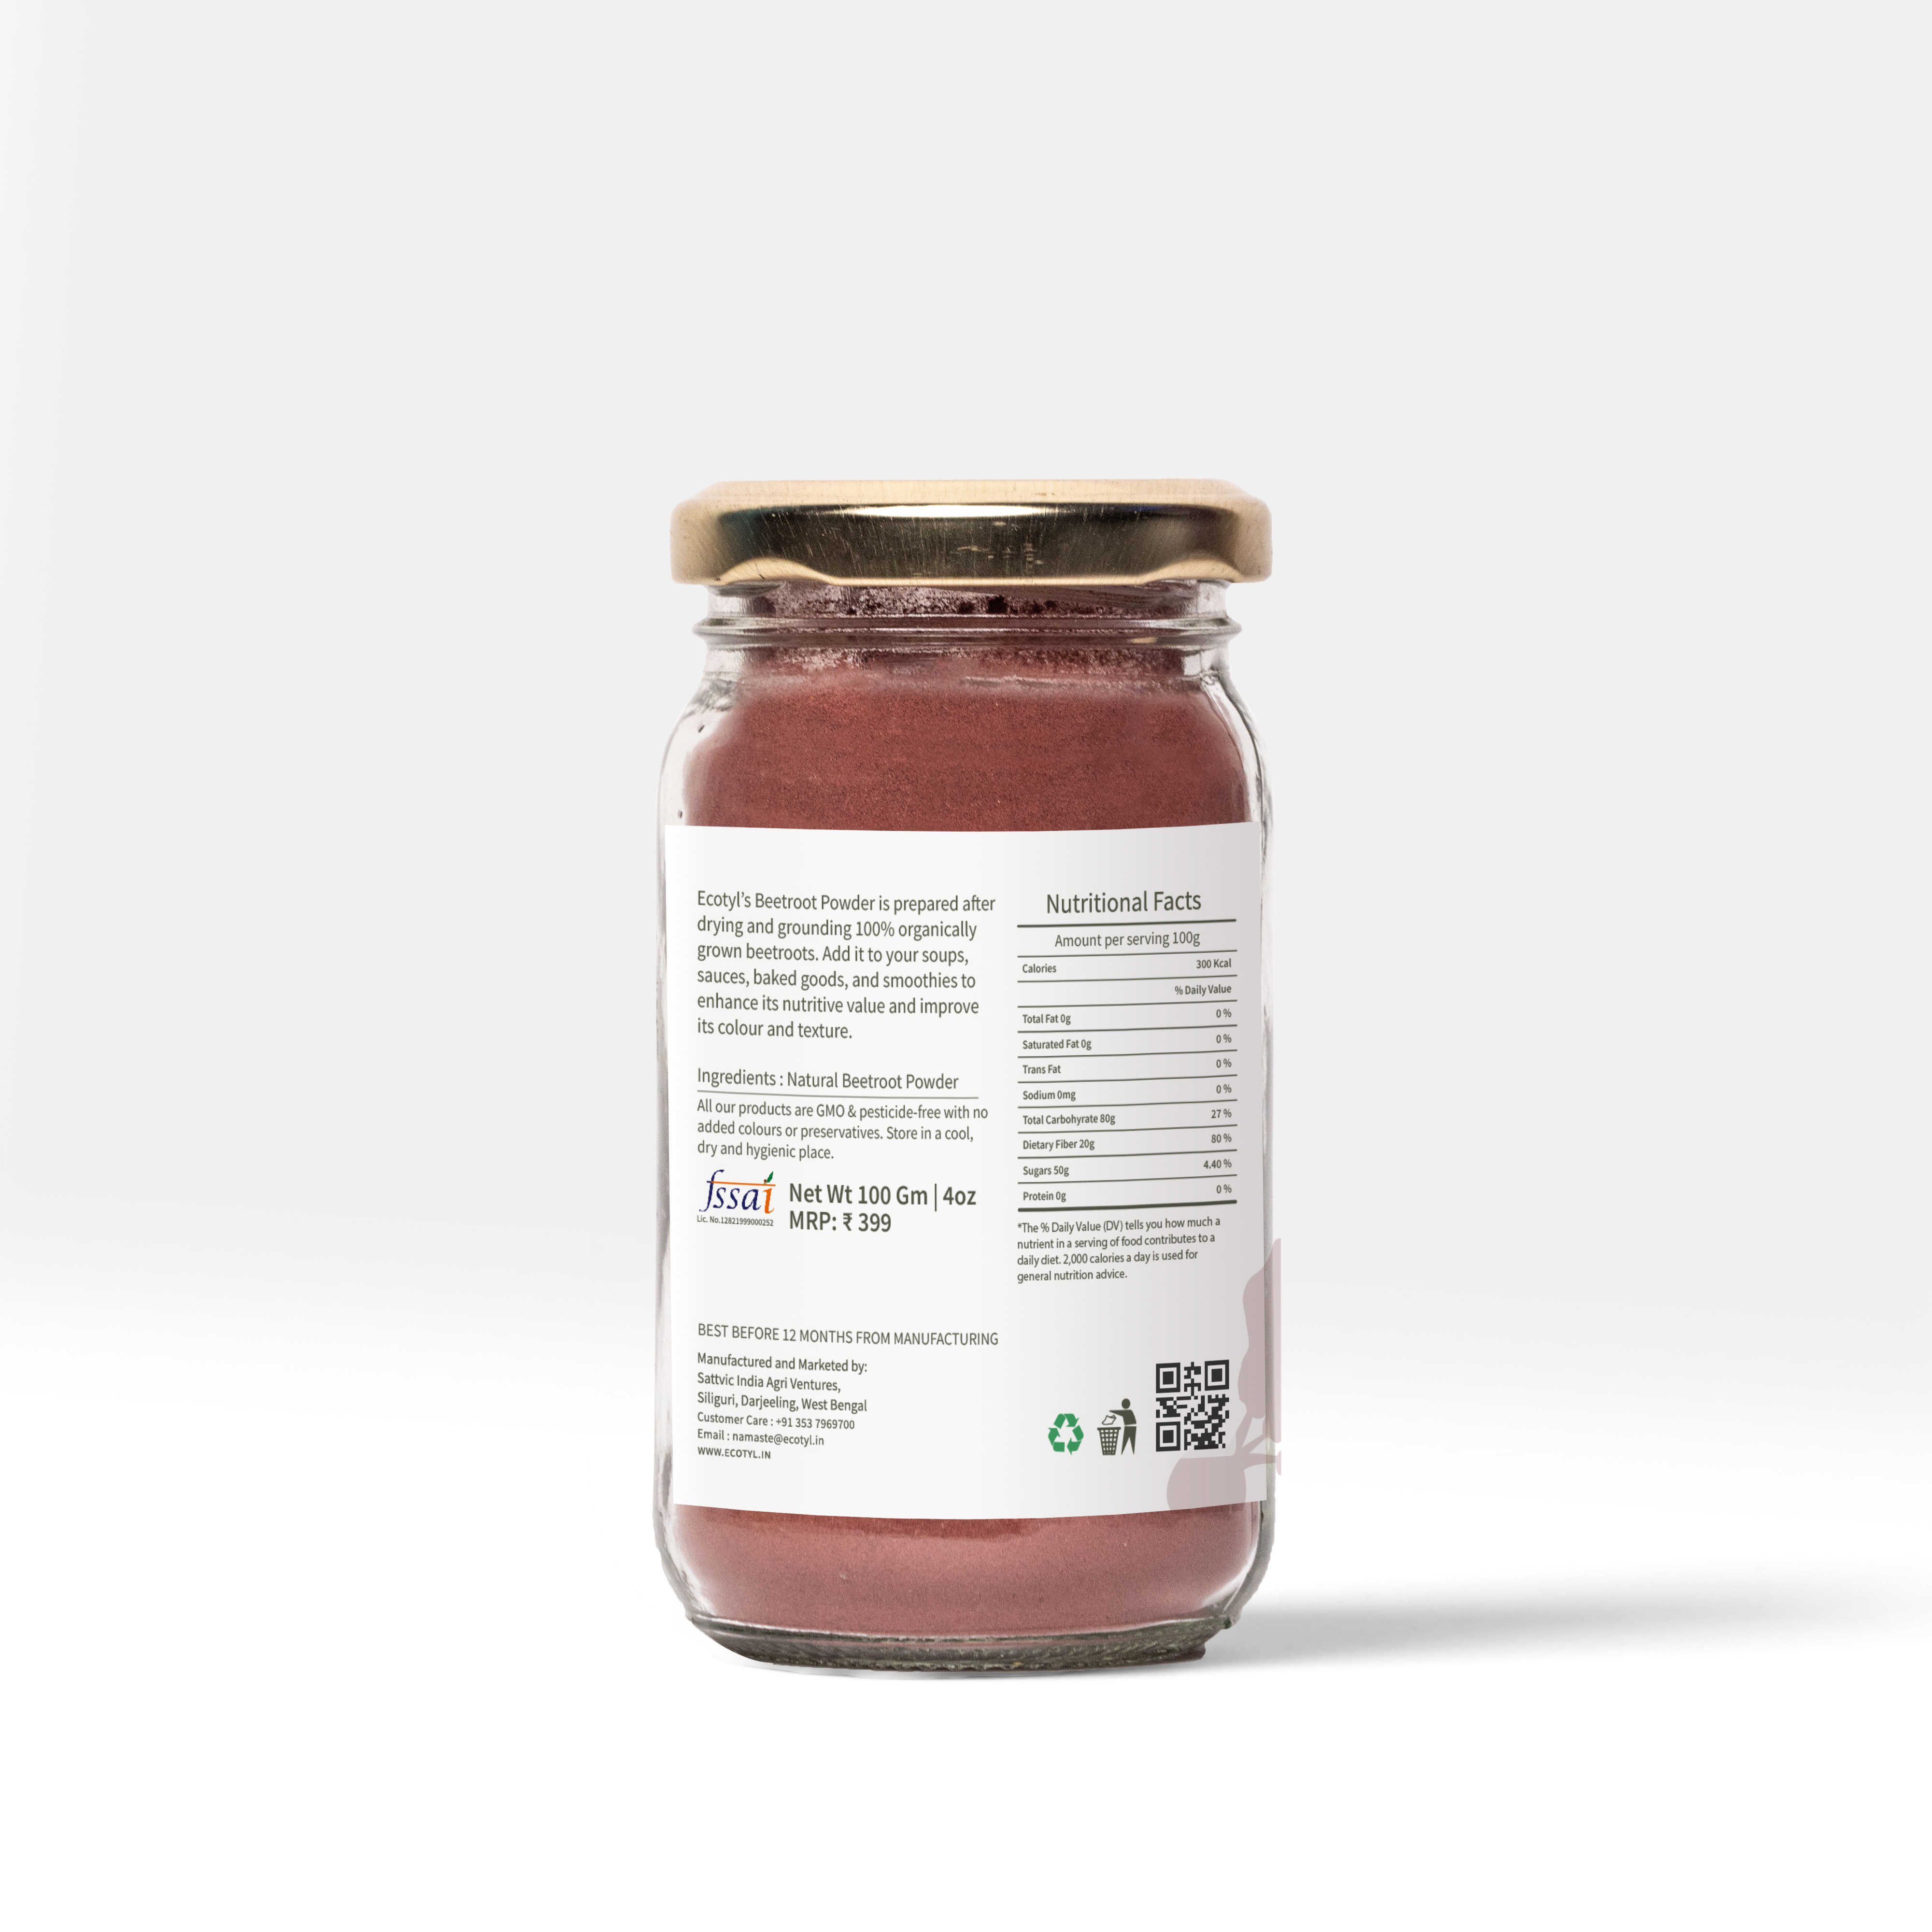 Buy Ecotyl Beetroot Powder - 100 g at Best Price Online